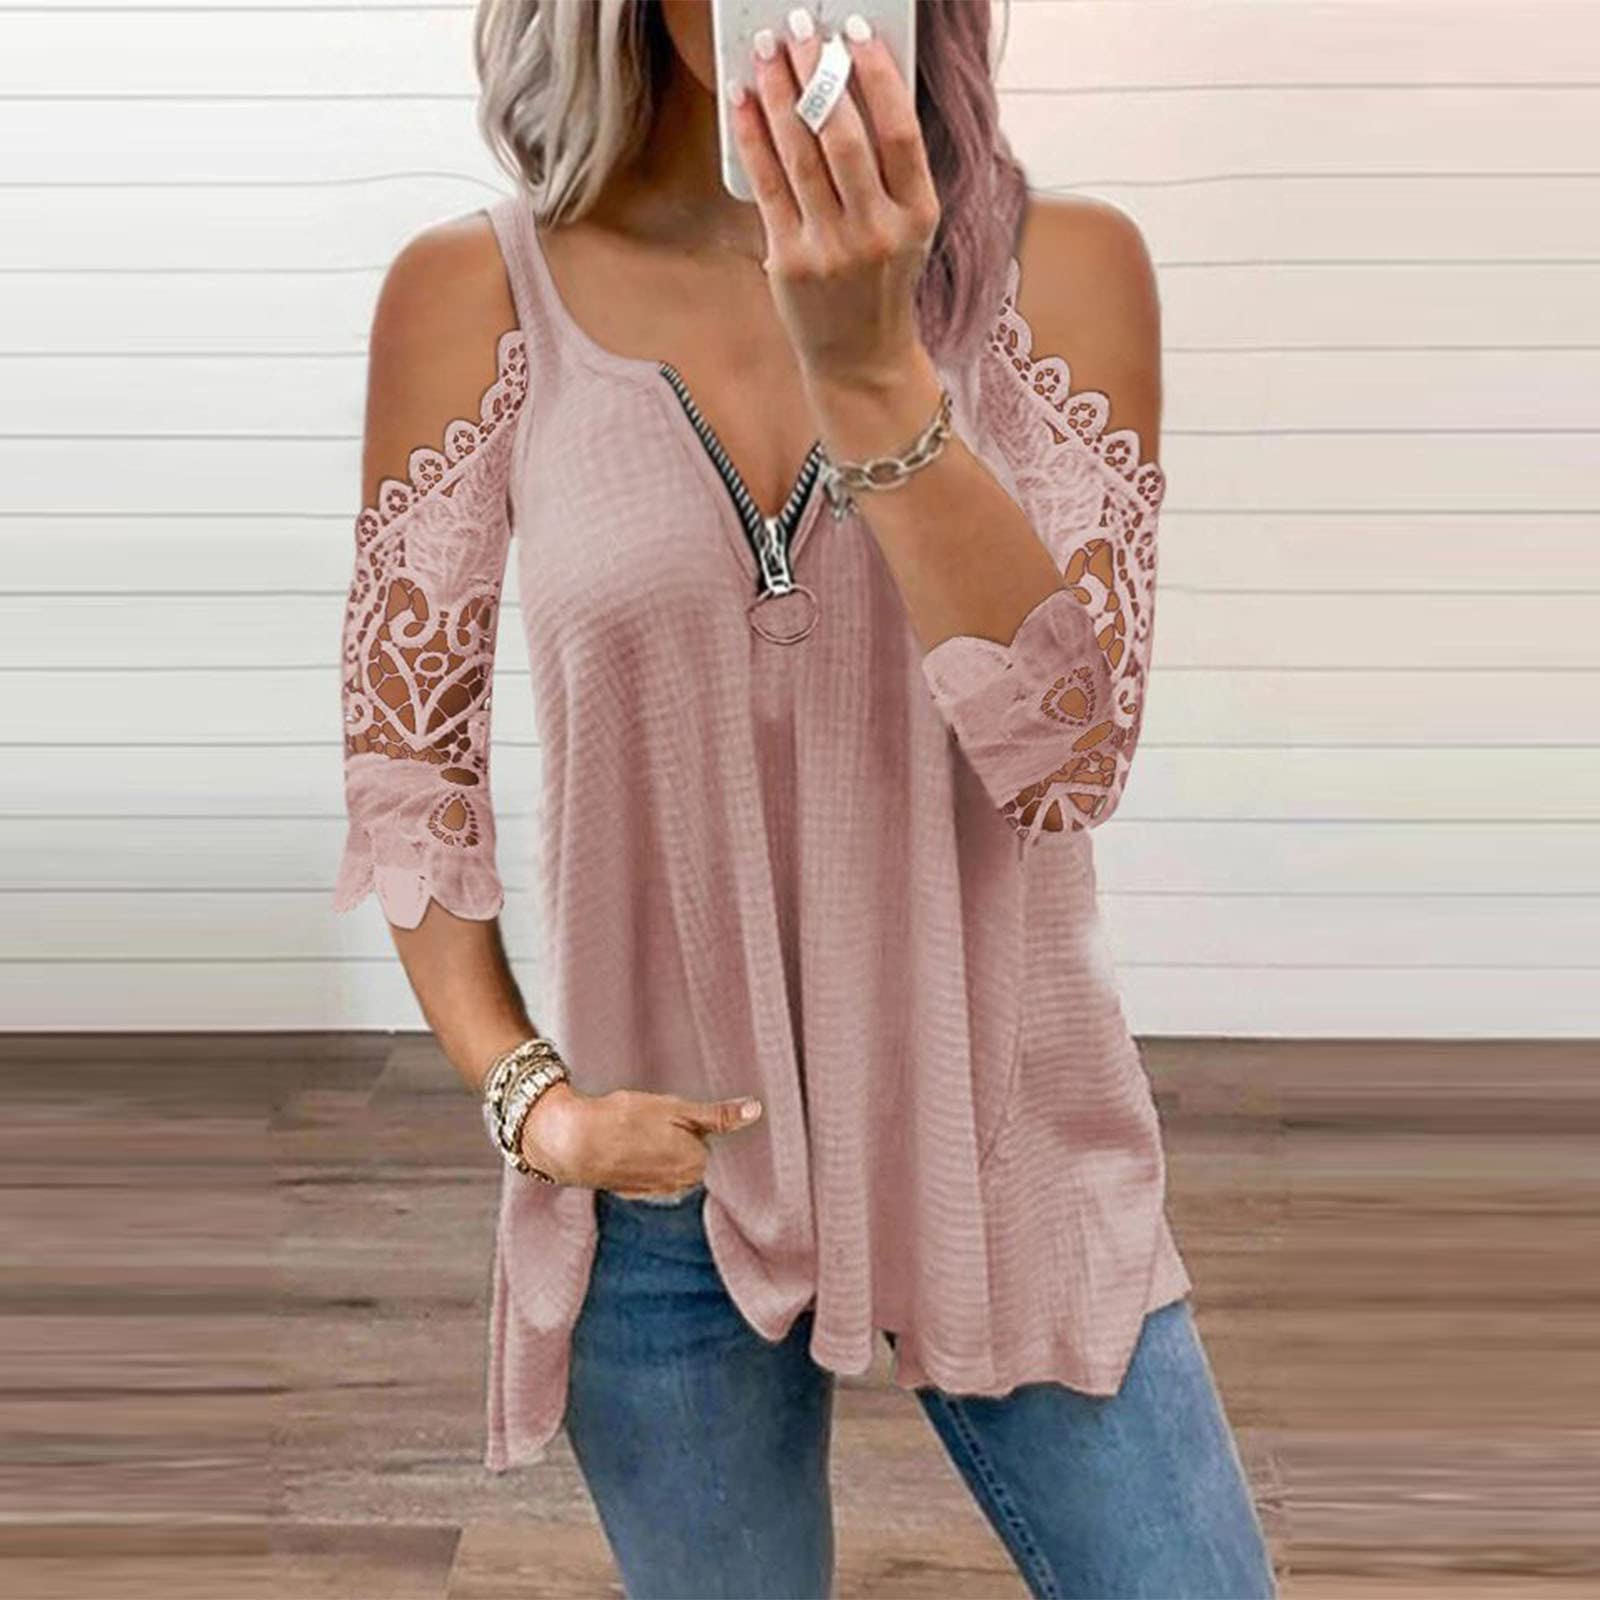 AMhomely Women Casual Lace Half SleeveＶ-Neck Zipper Hollow Out T-Shirt Blouse Tops Sale Clearance UK Size